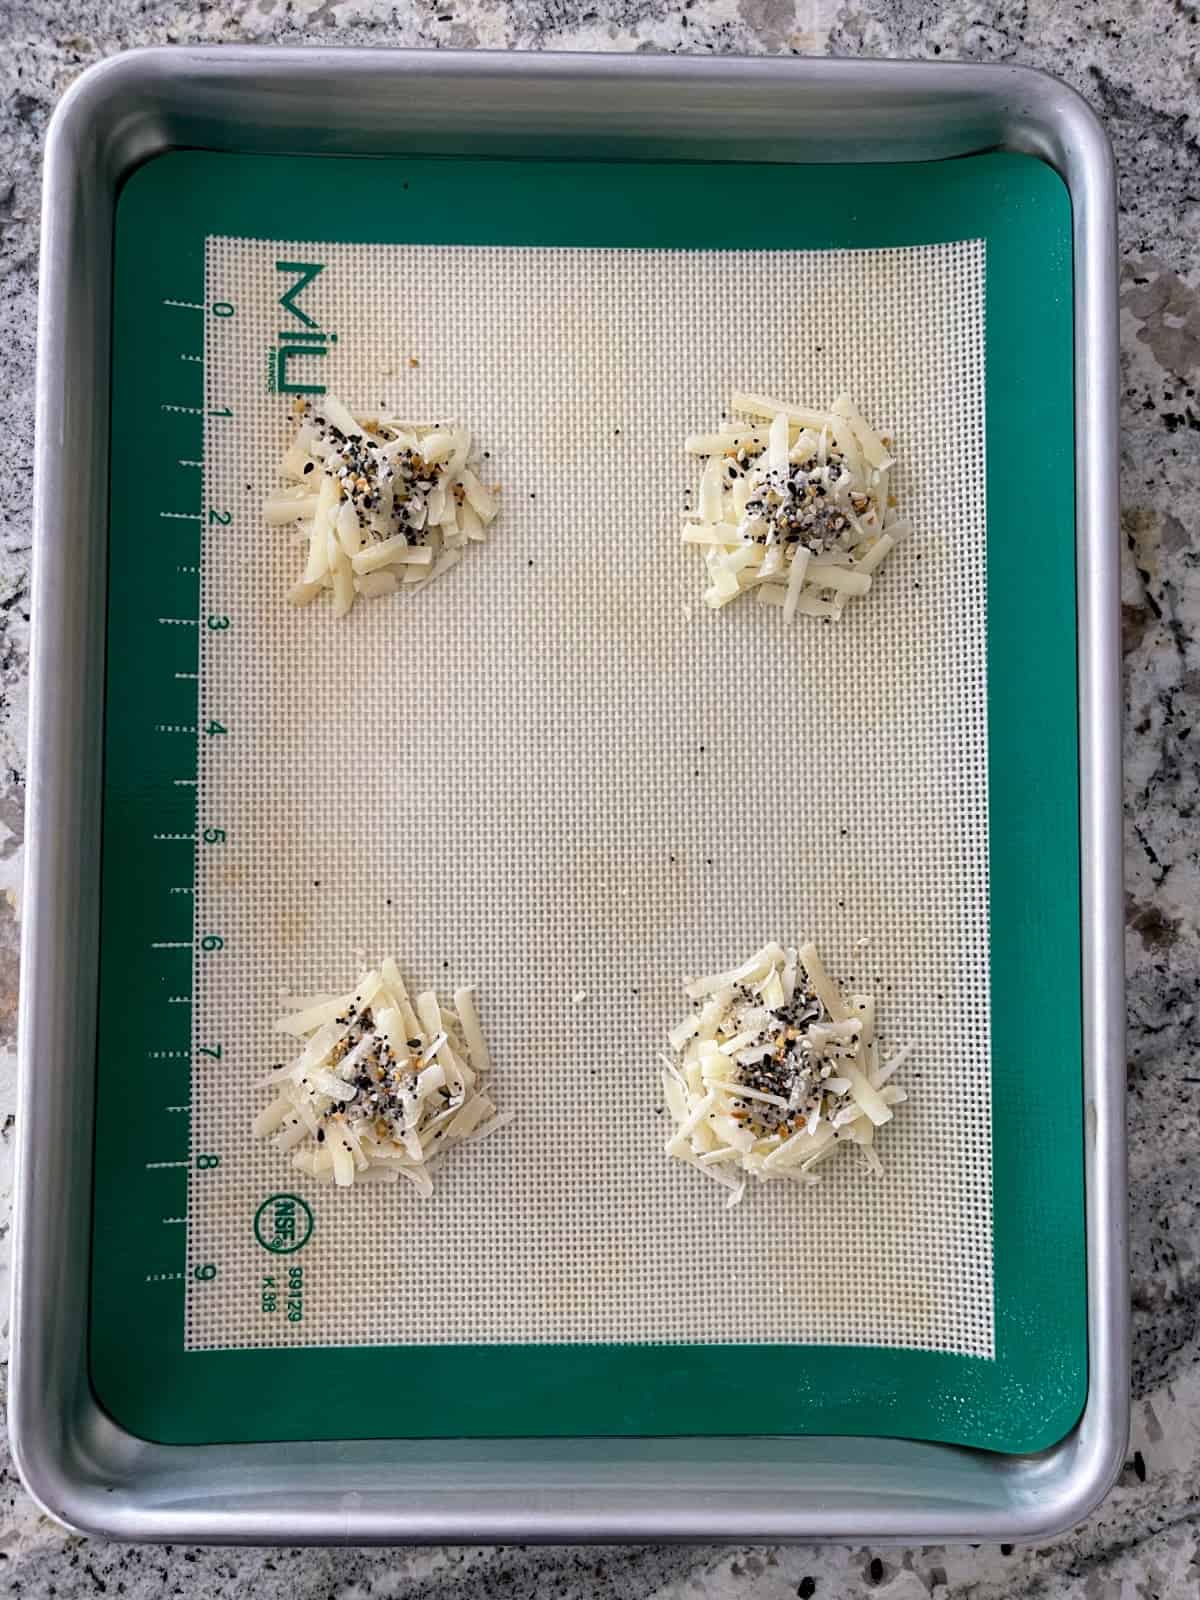 Shredded Parmesan cheese topped with everything bagel seasoning on silicone lined baking sheet.